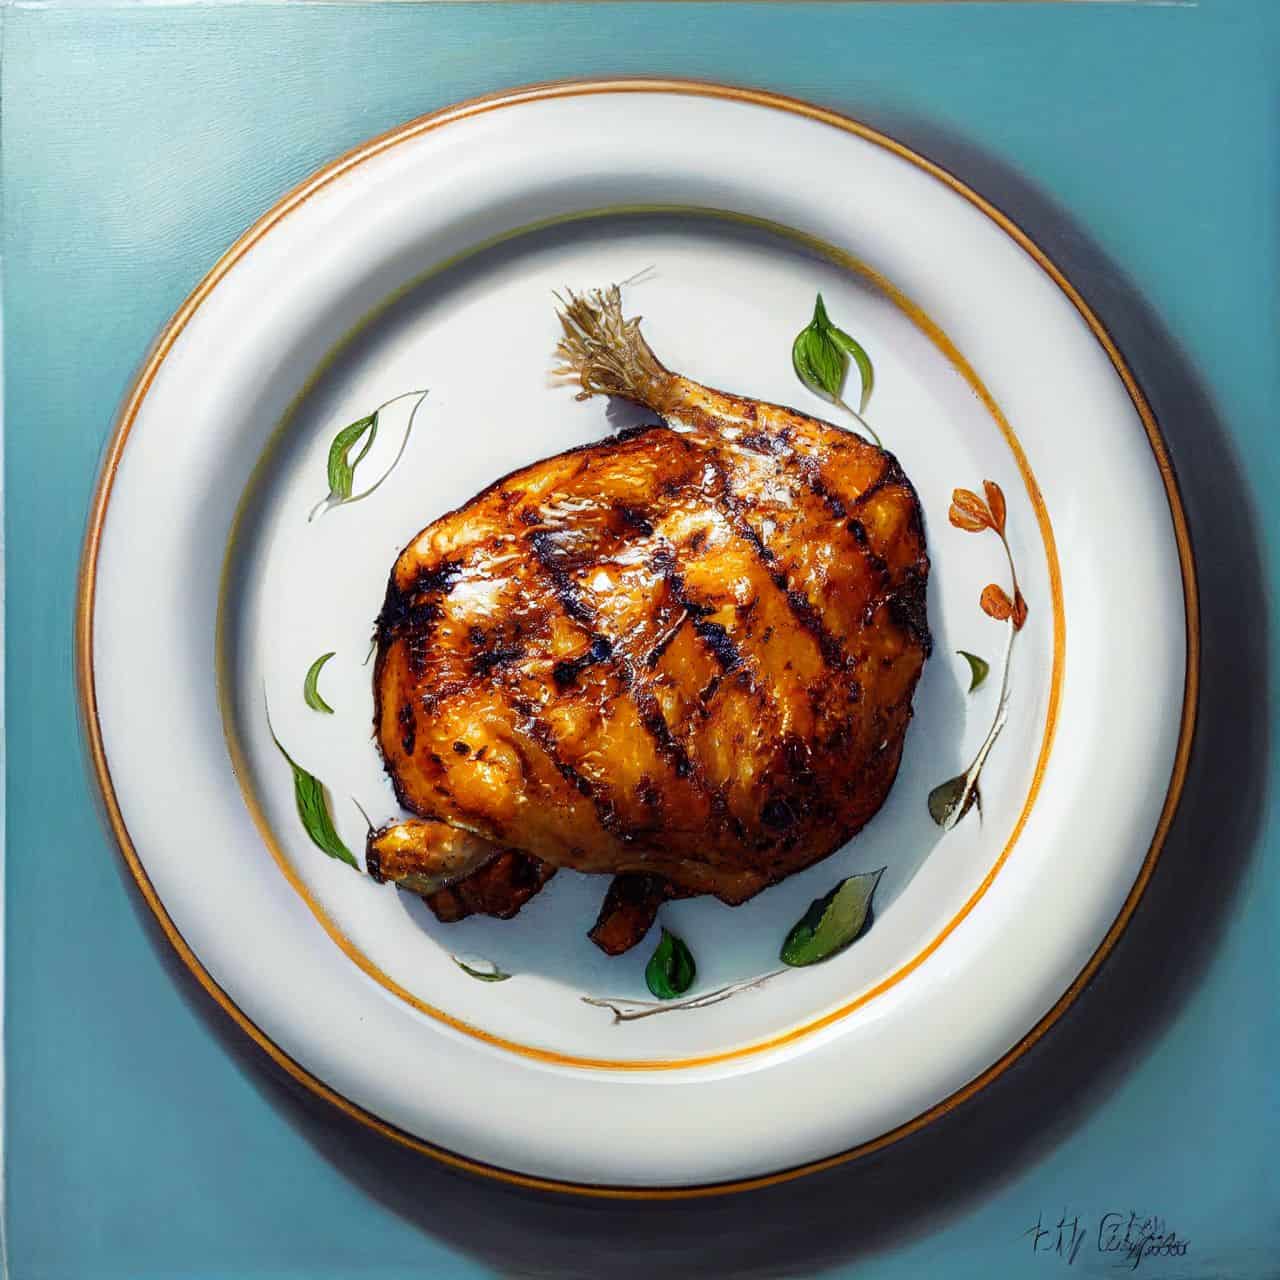 a piece of grilled chicken on a plate